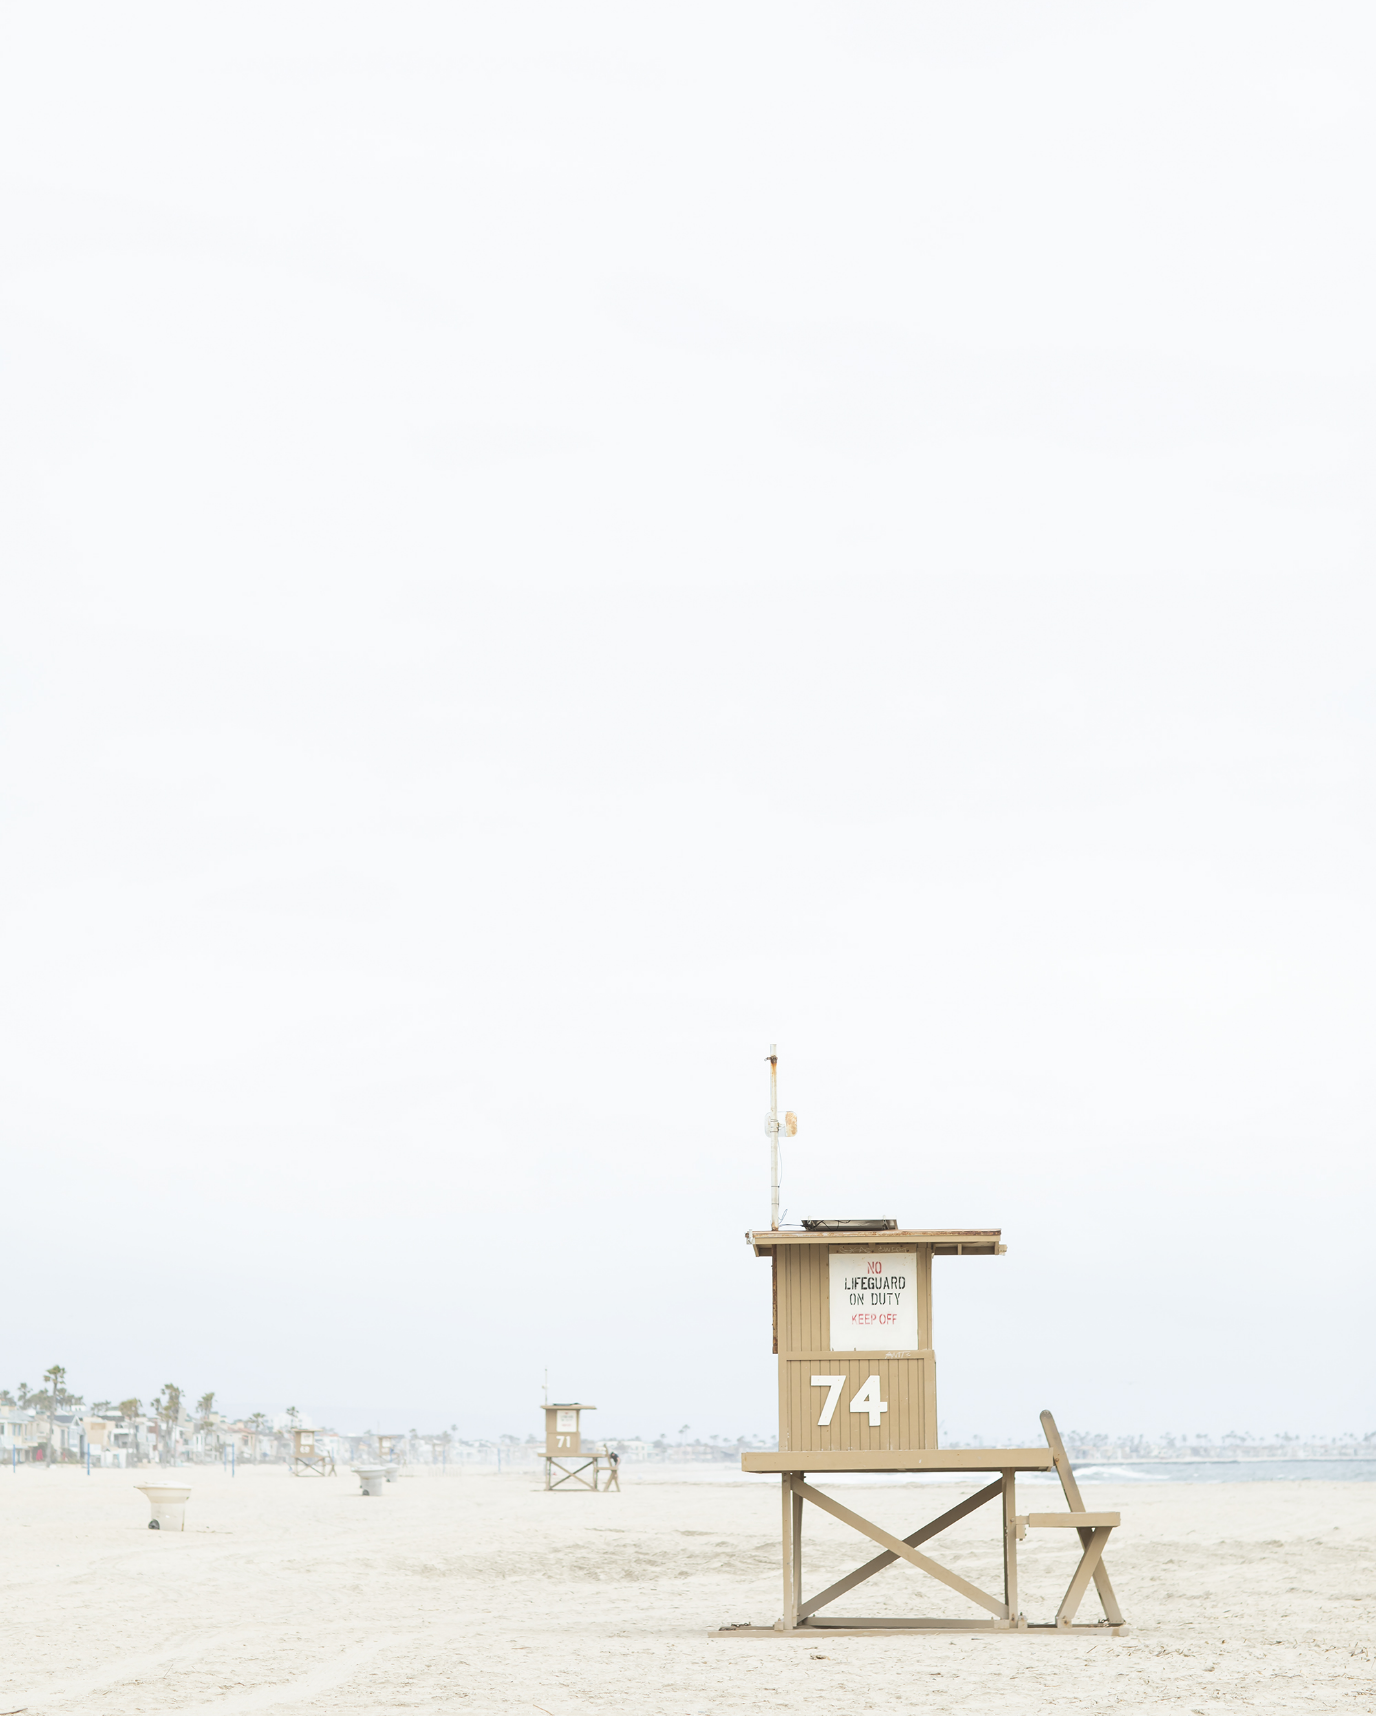 Found Photography fine art print of a lifeguard tower on the beach